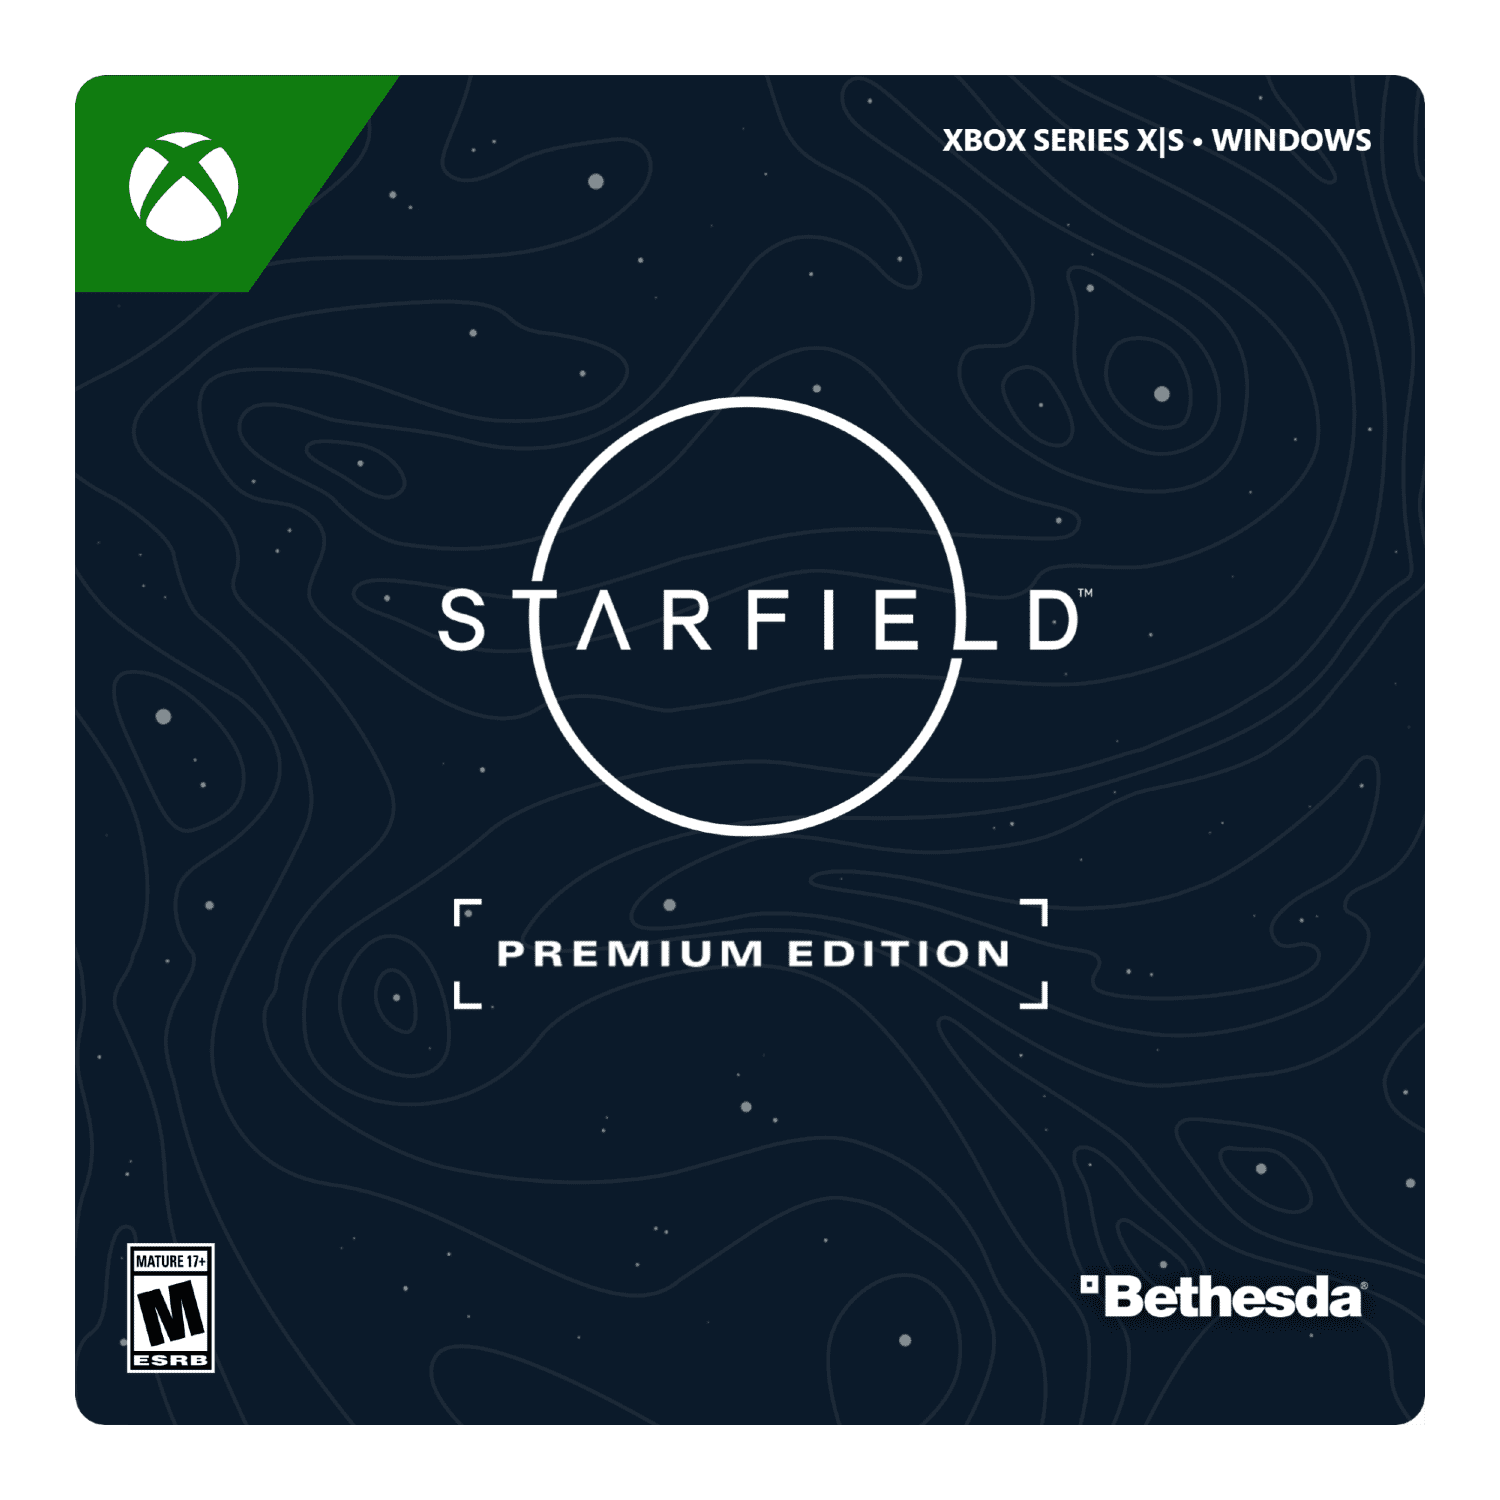 Xbox Wants Starfield To Be As Popular As Skyrim 12 Years From Now